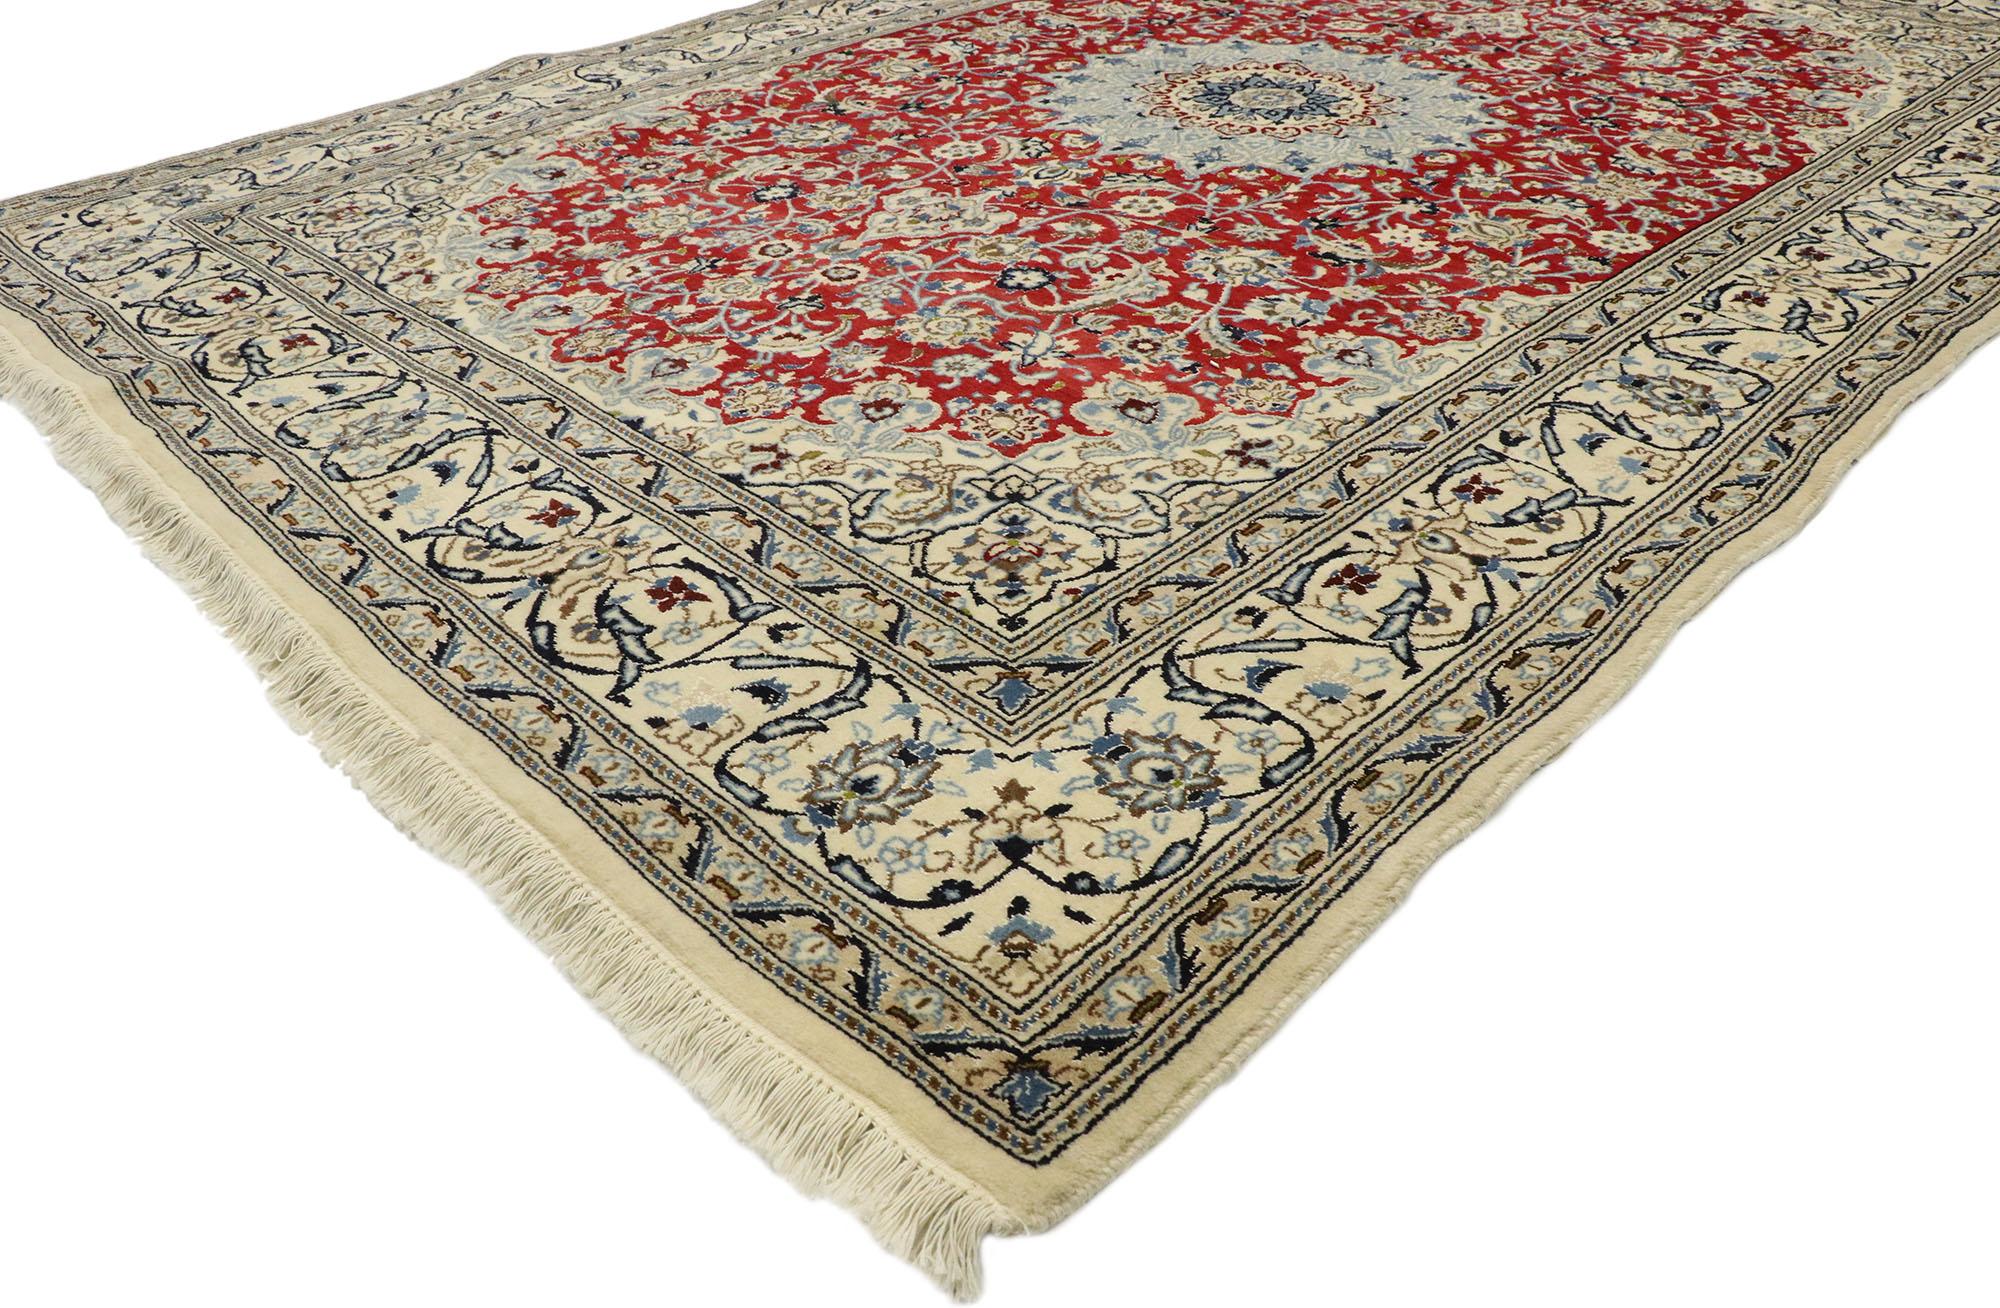 77531, vintage Persian Nain rug with Arabesque Art Nouveau style. This hand knotted wool vintage Persian Nain rug with traditional style features an ornate round center medallion surrounded by an impressive all-over arabesque floral pattern. A vast